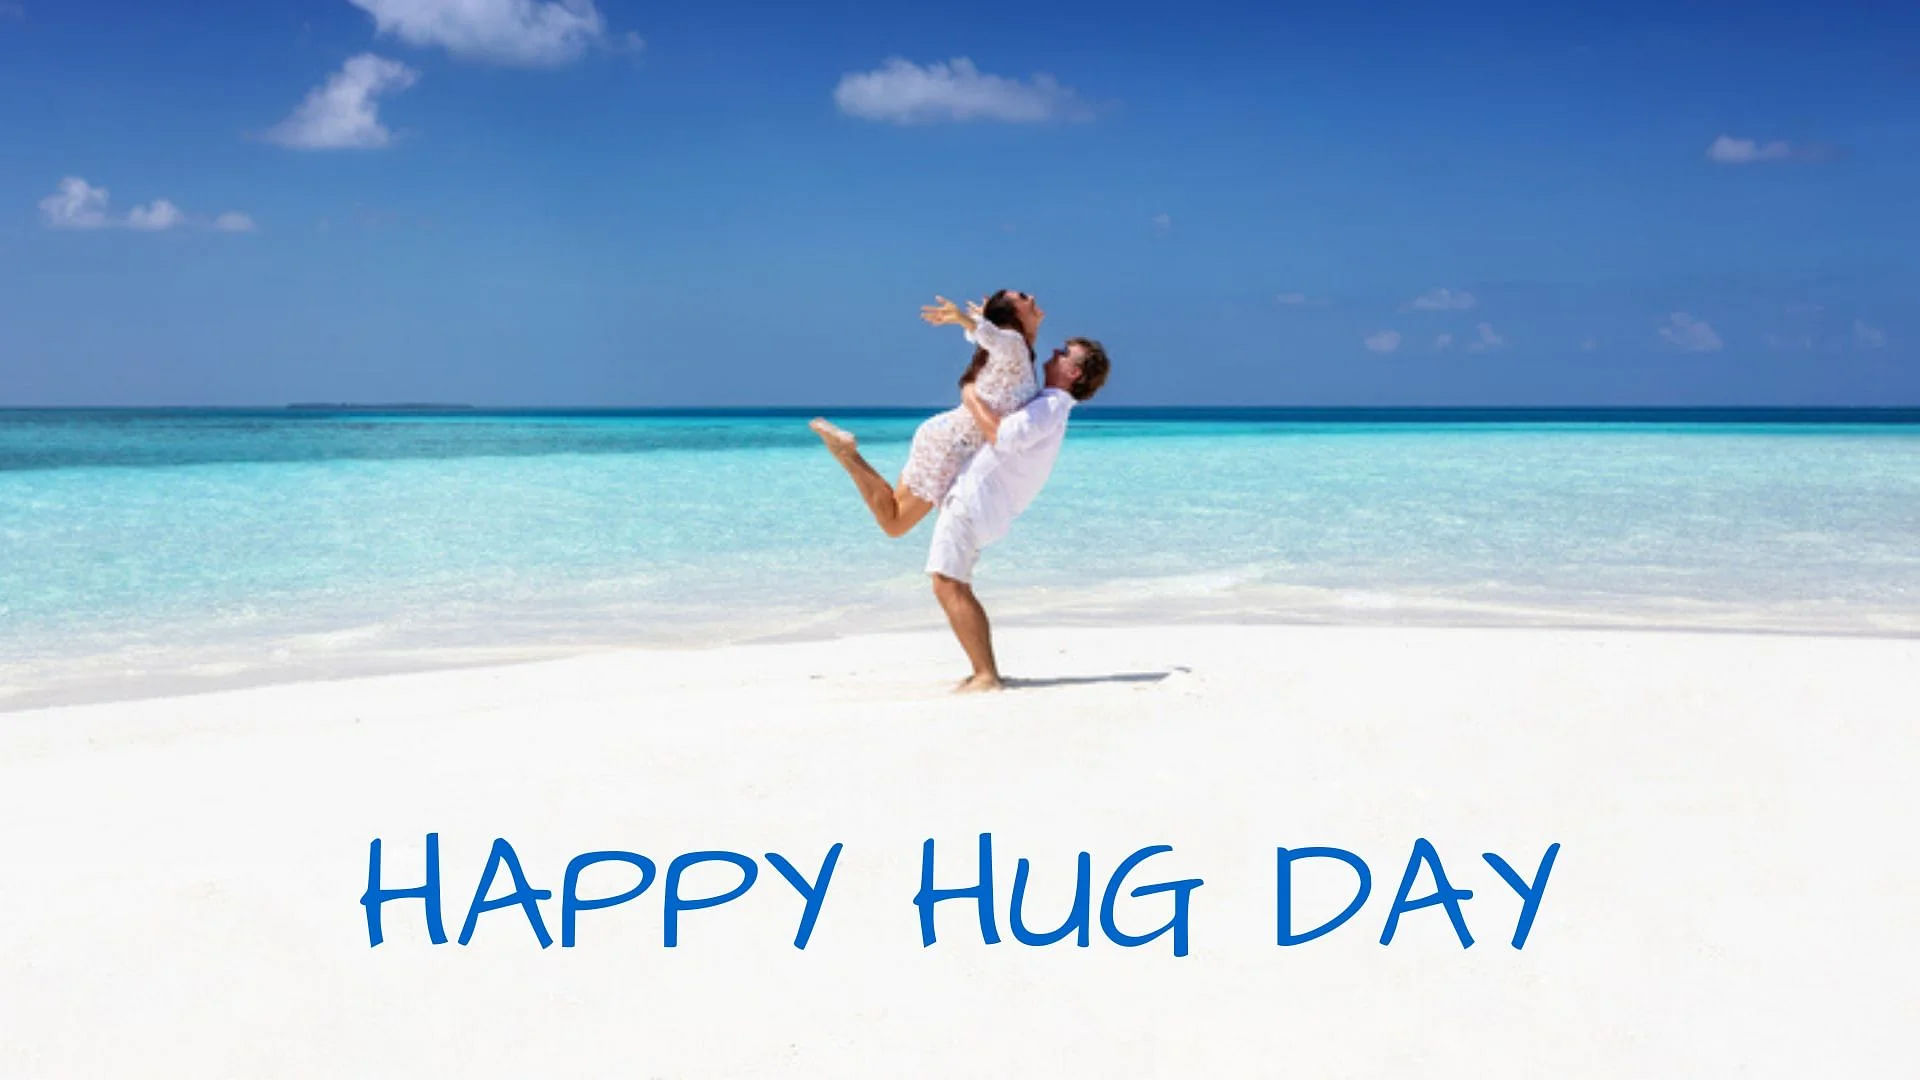 Happy Hug Day 2021: Images, Quotes, and Wishes